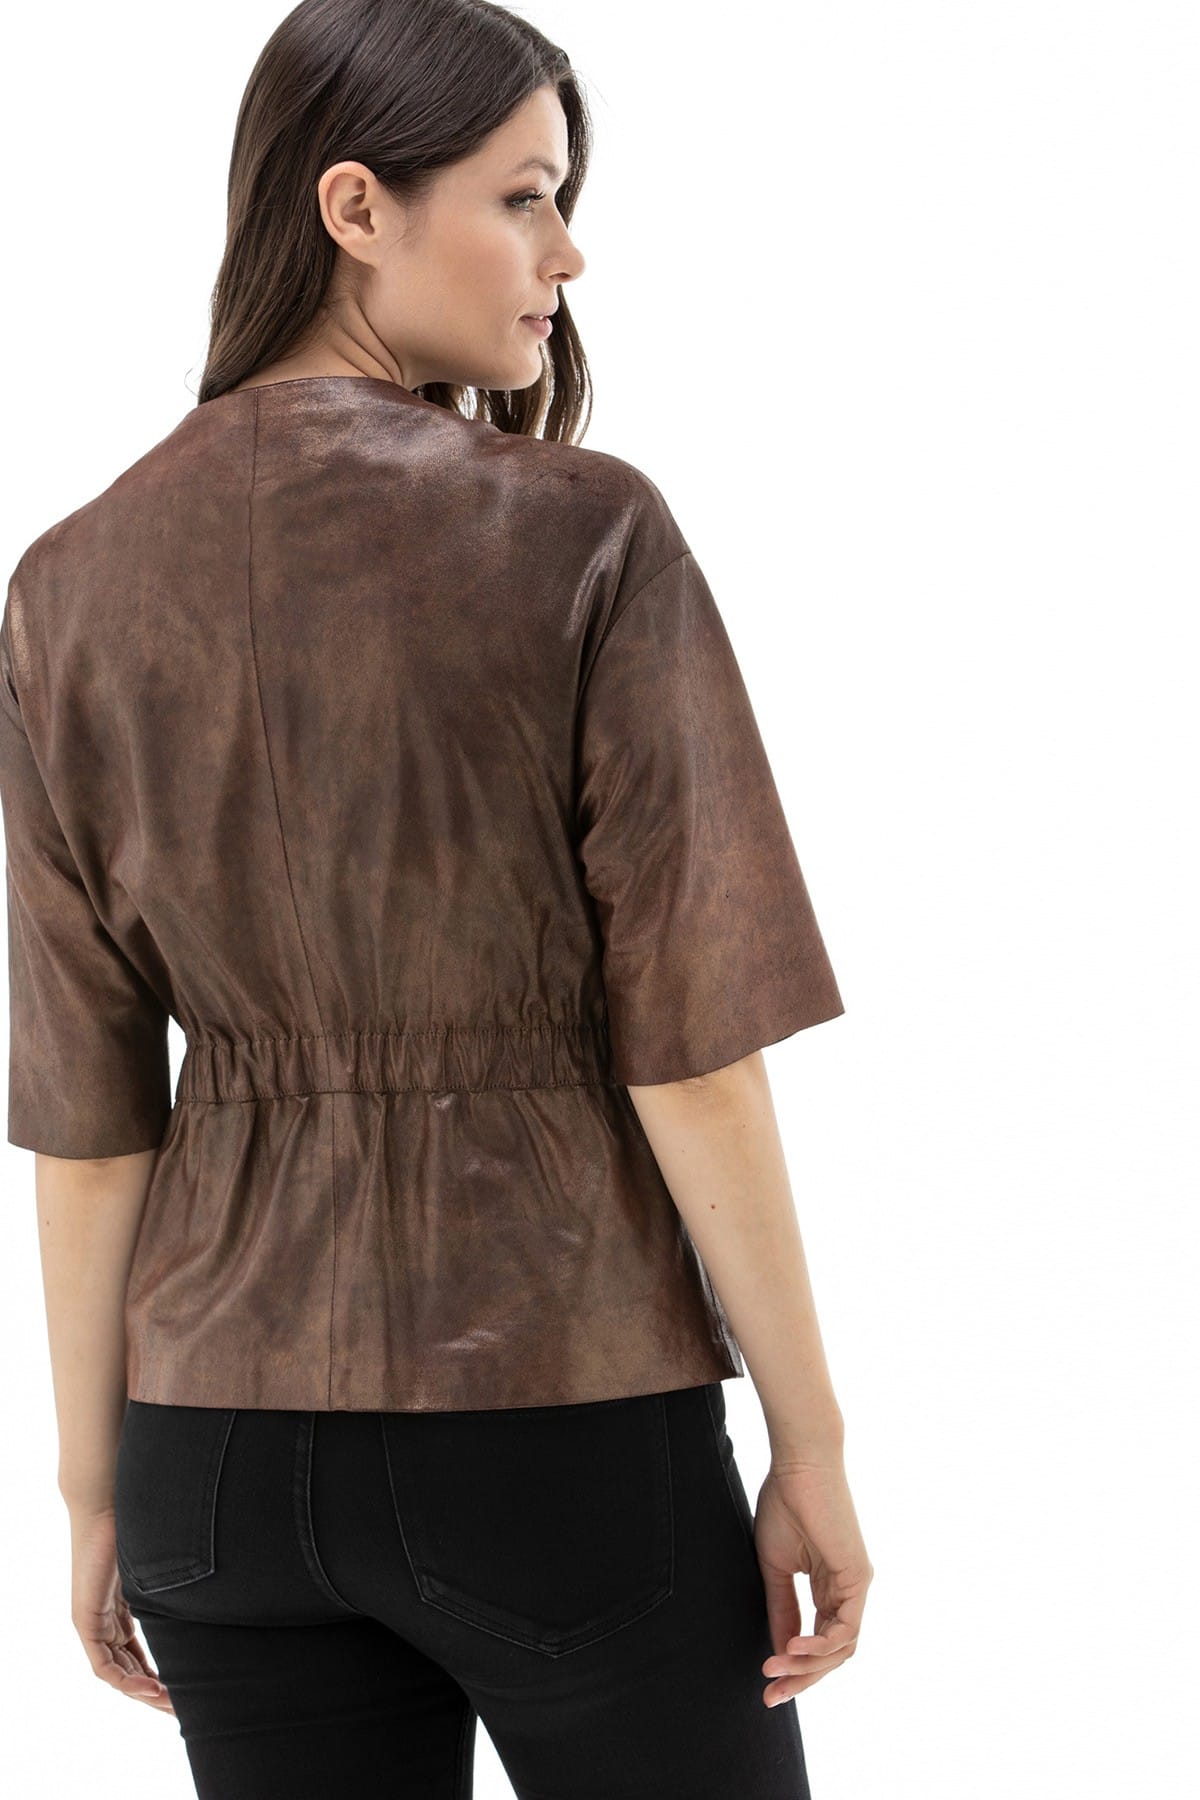 Chocolate Brown Leather Jacket Womens